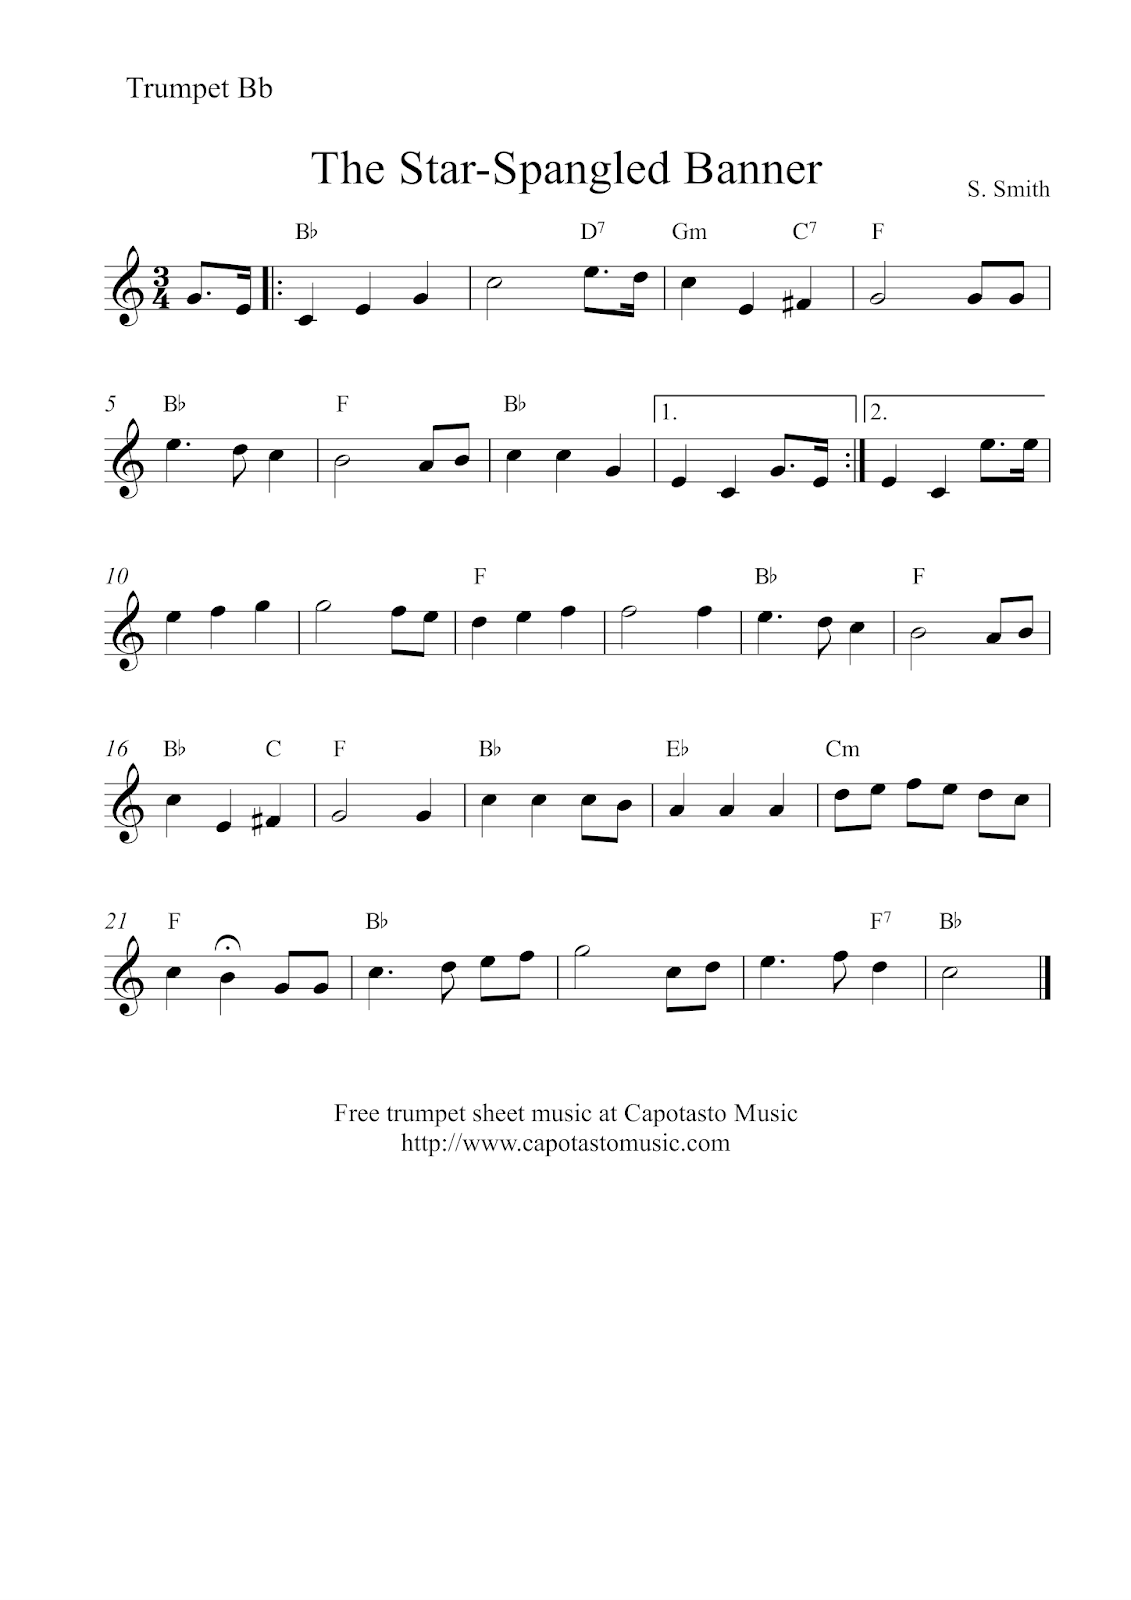 easy-sheet-music-for-beginners-free-trumpet-sheet-music-the-star-spangled-banner